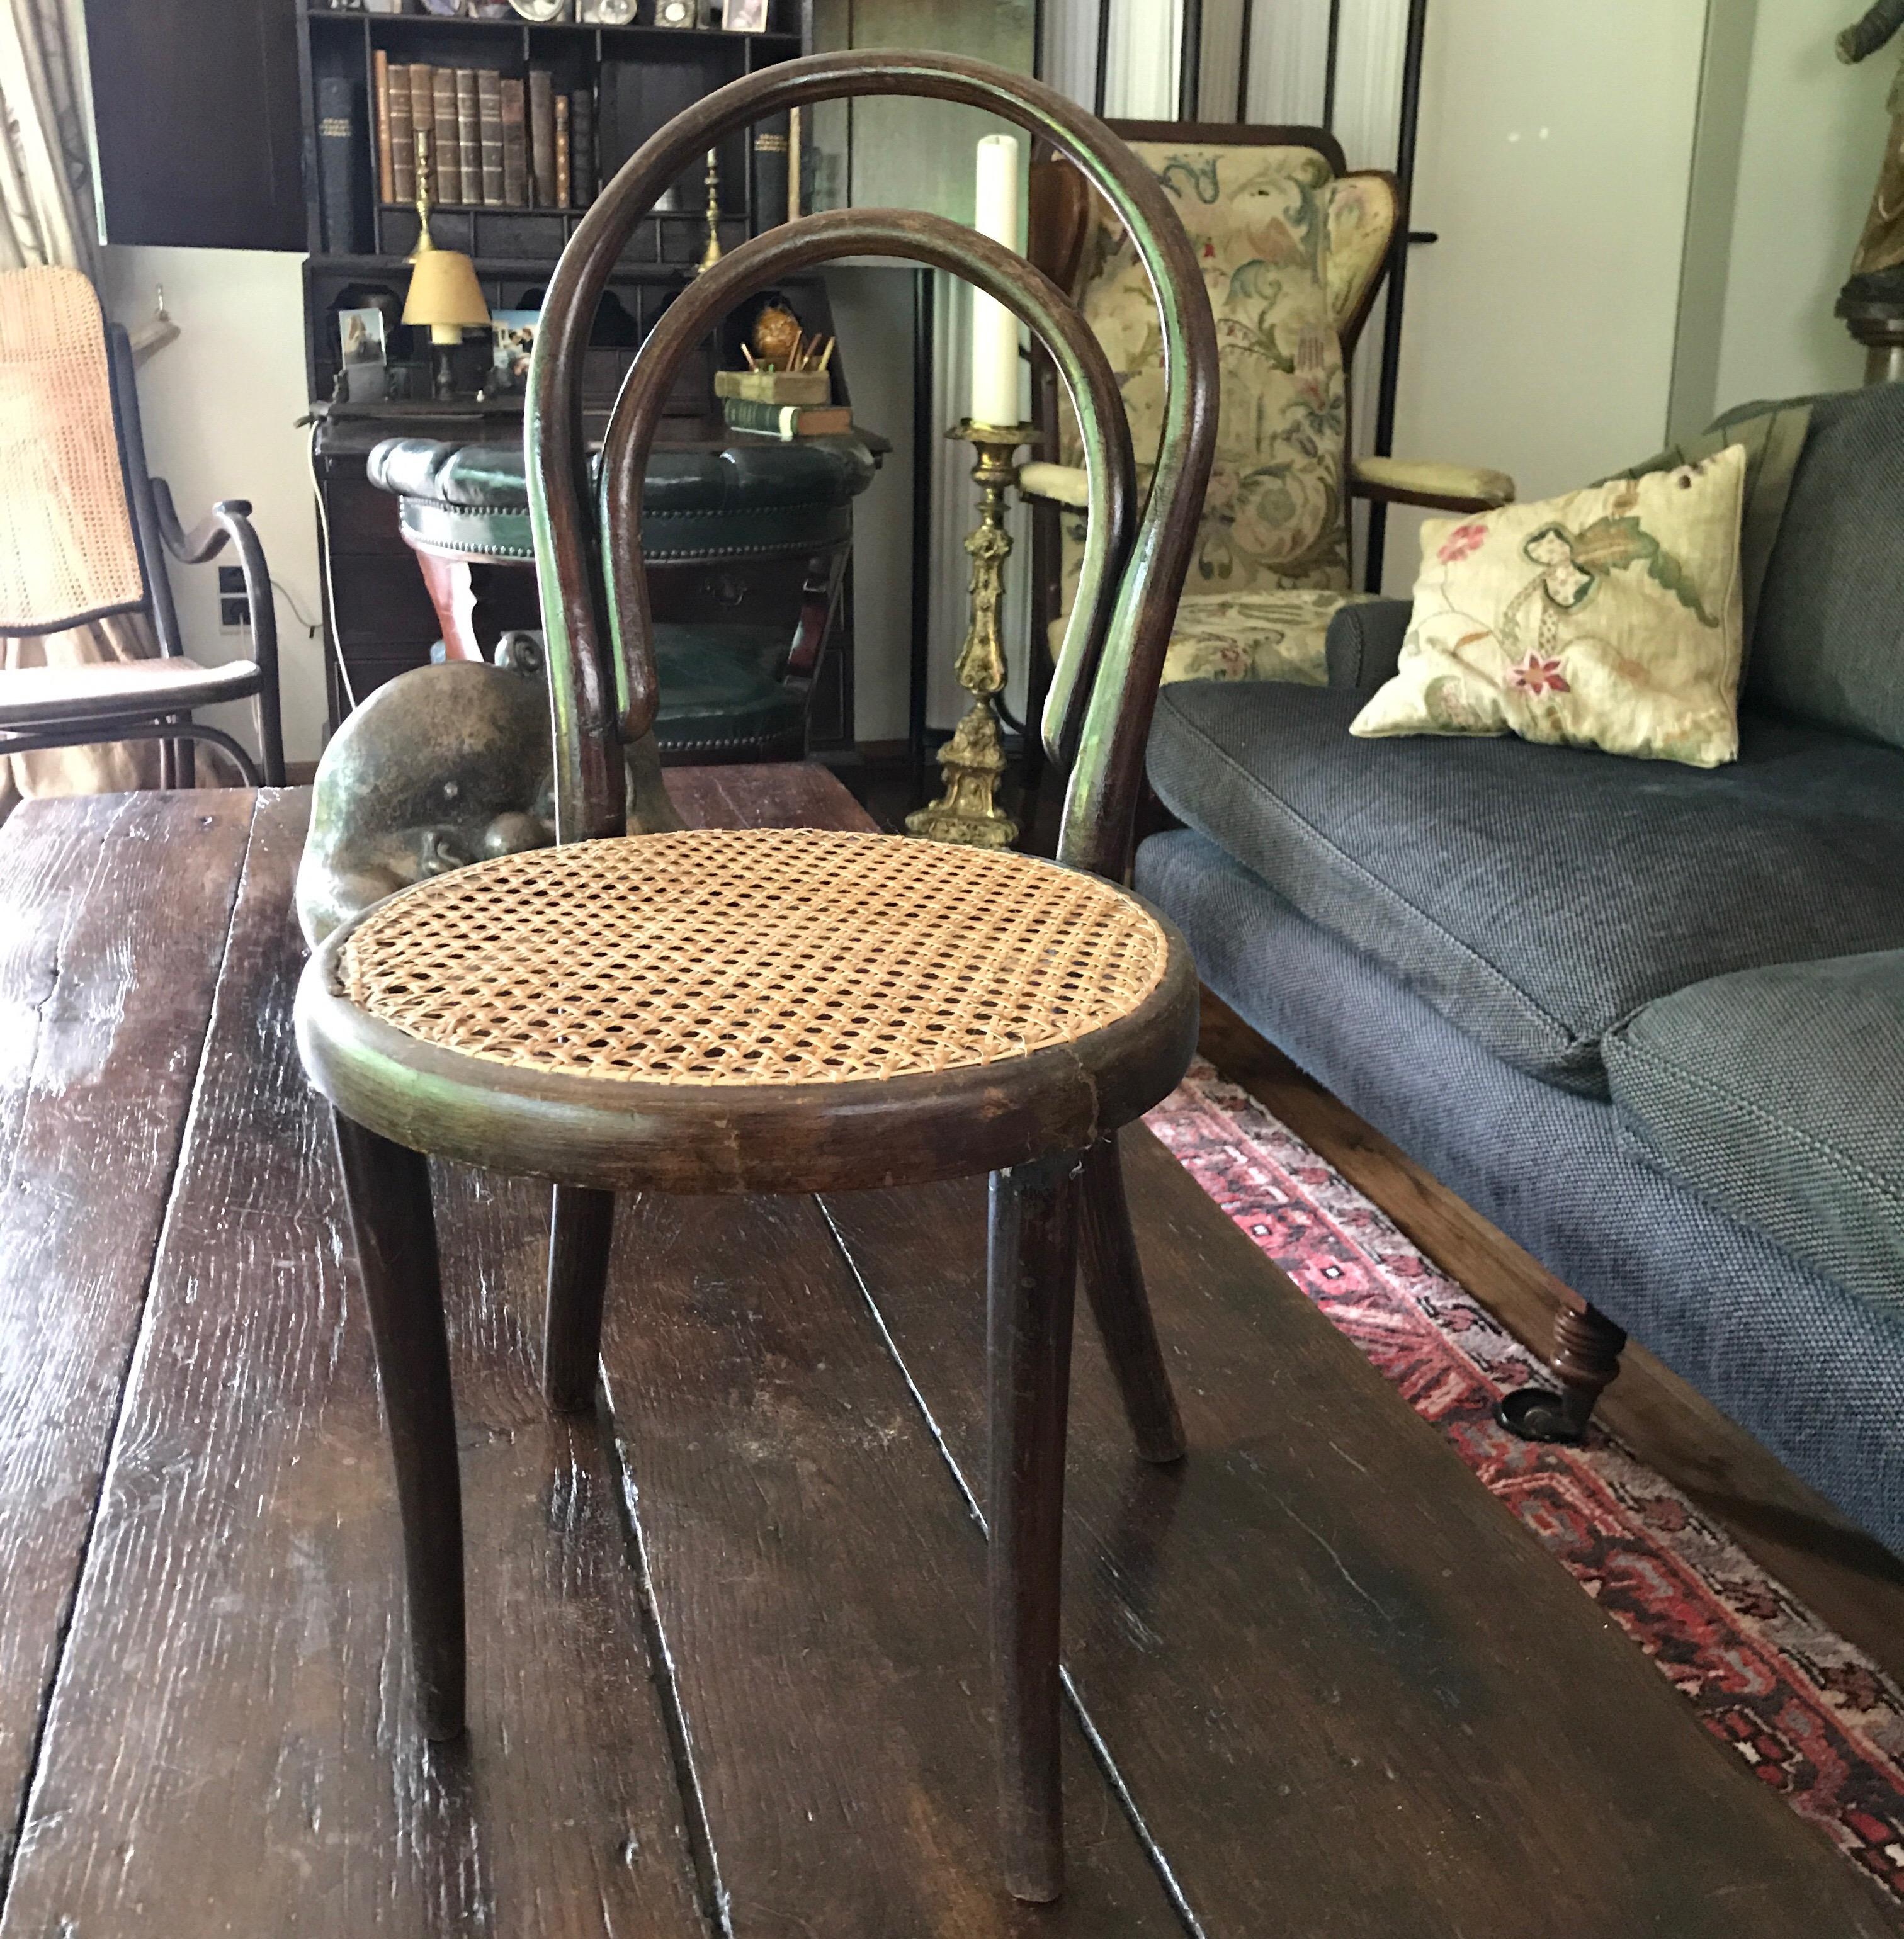 Early production of the Thonet child chair, 1890
Very good condition and perfect caning.